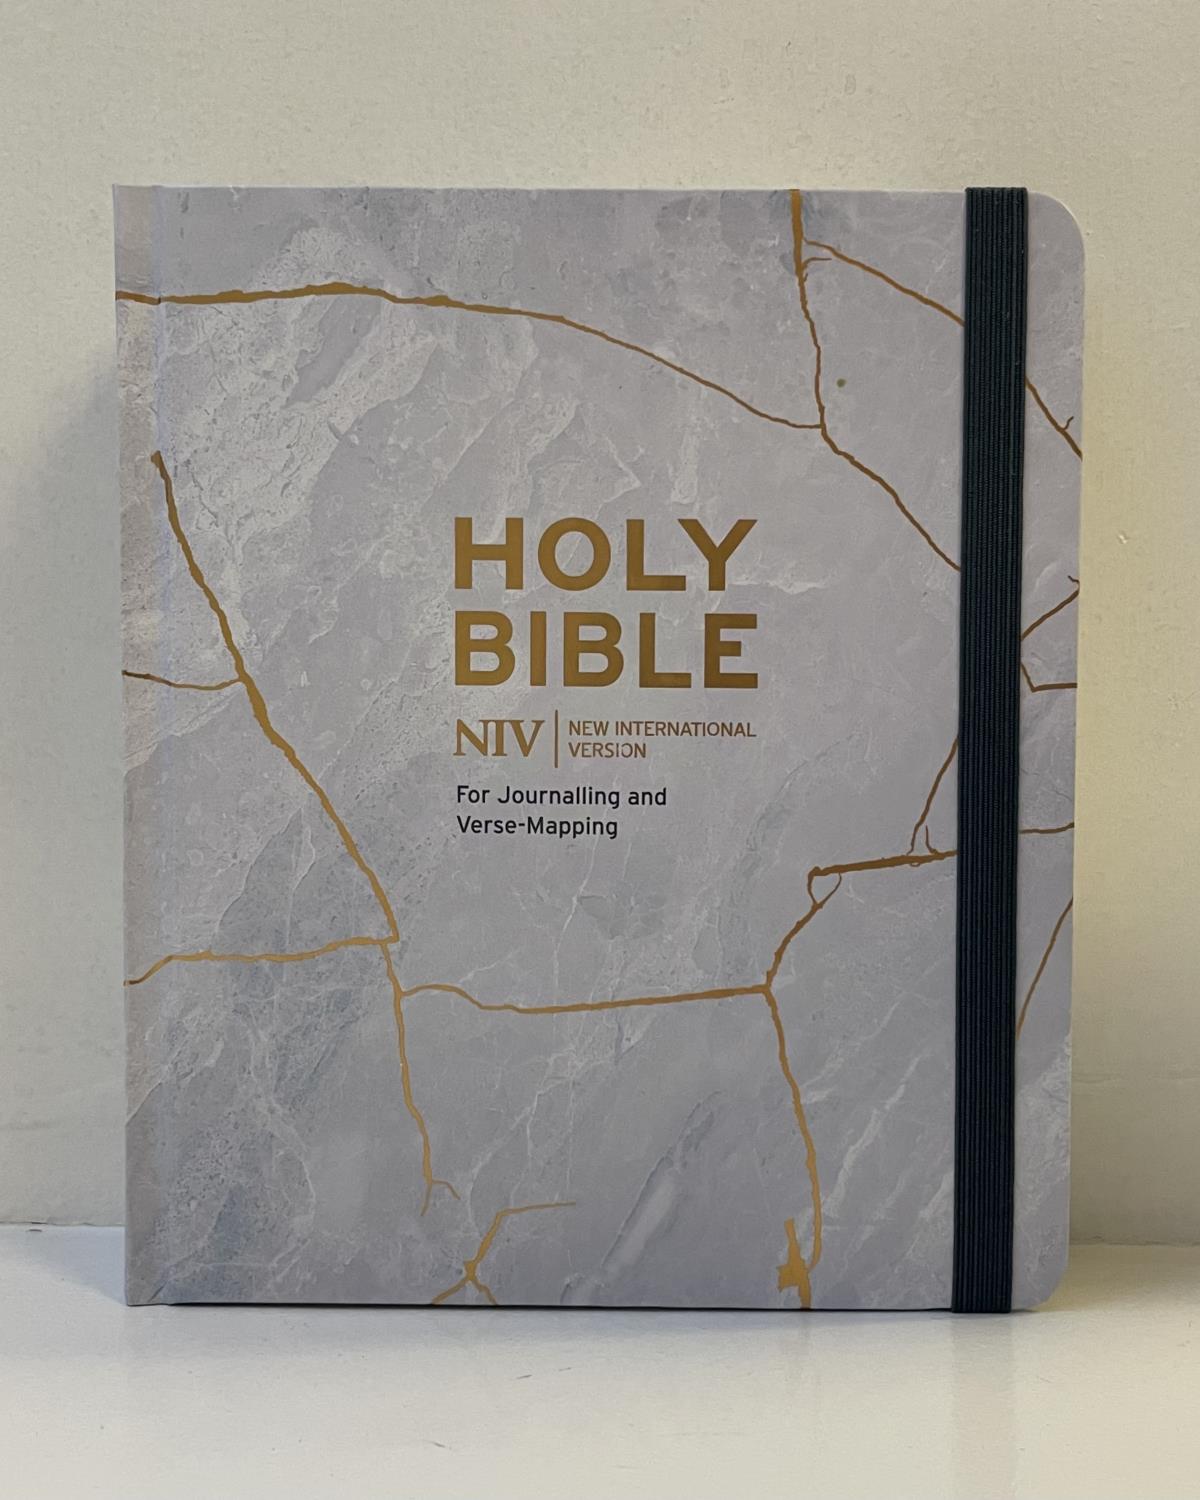 NIV Holy Bible for Journalling and Verse-mapping